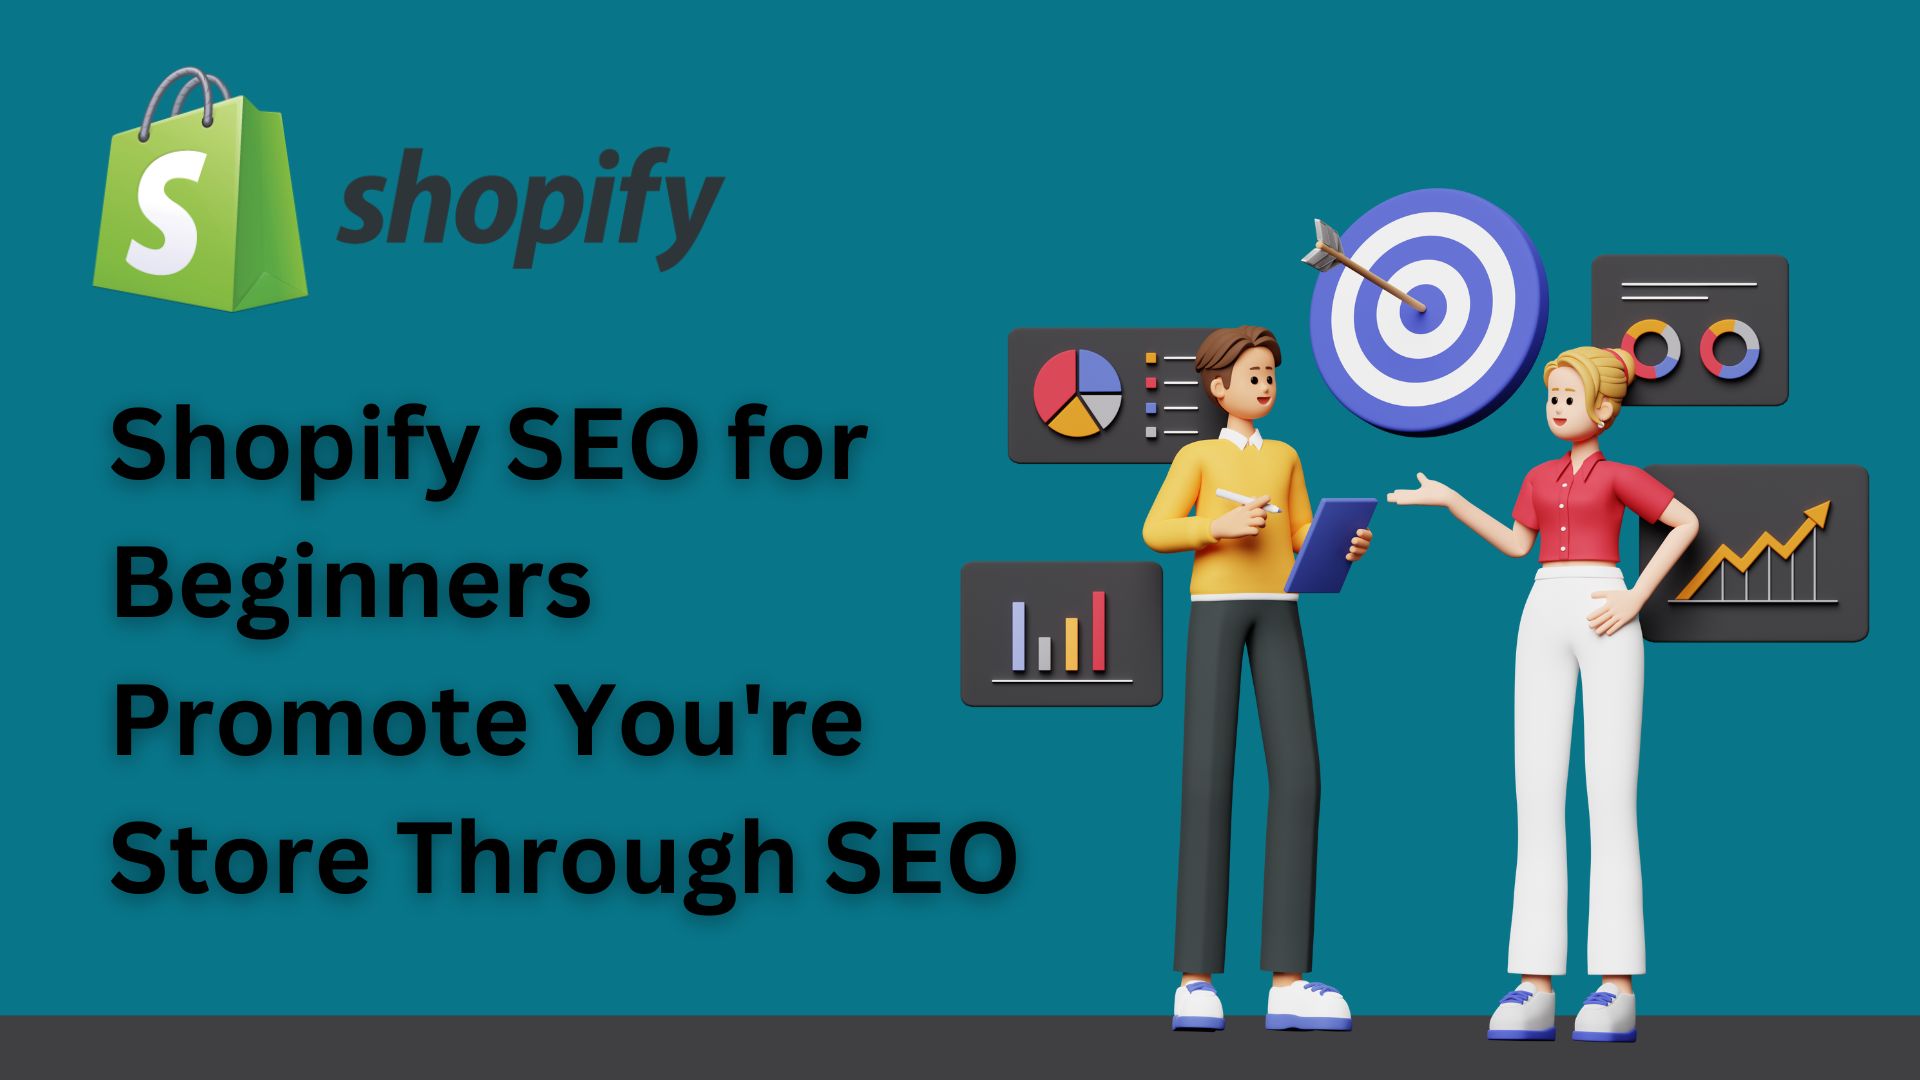 Shopify SEO for beginners - Promote You're Store Through SEO